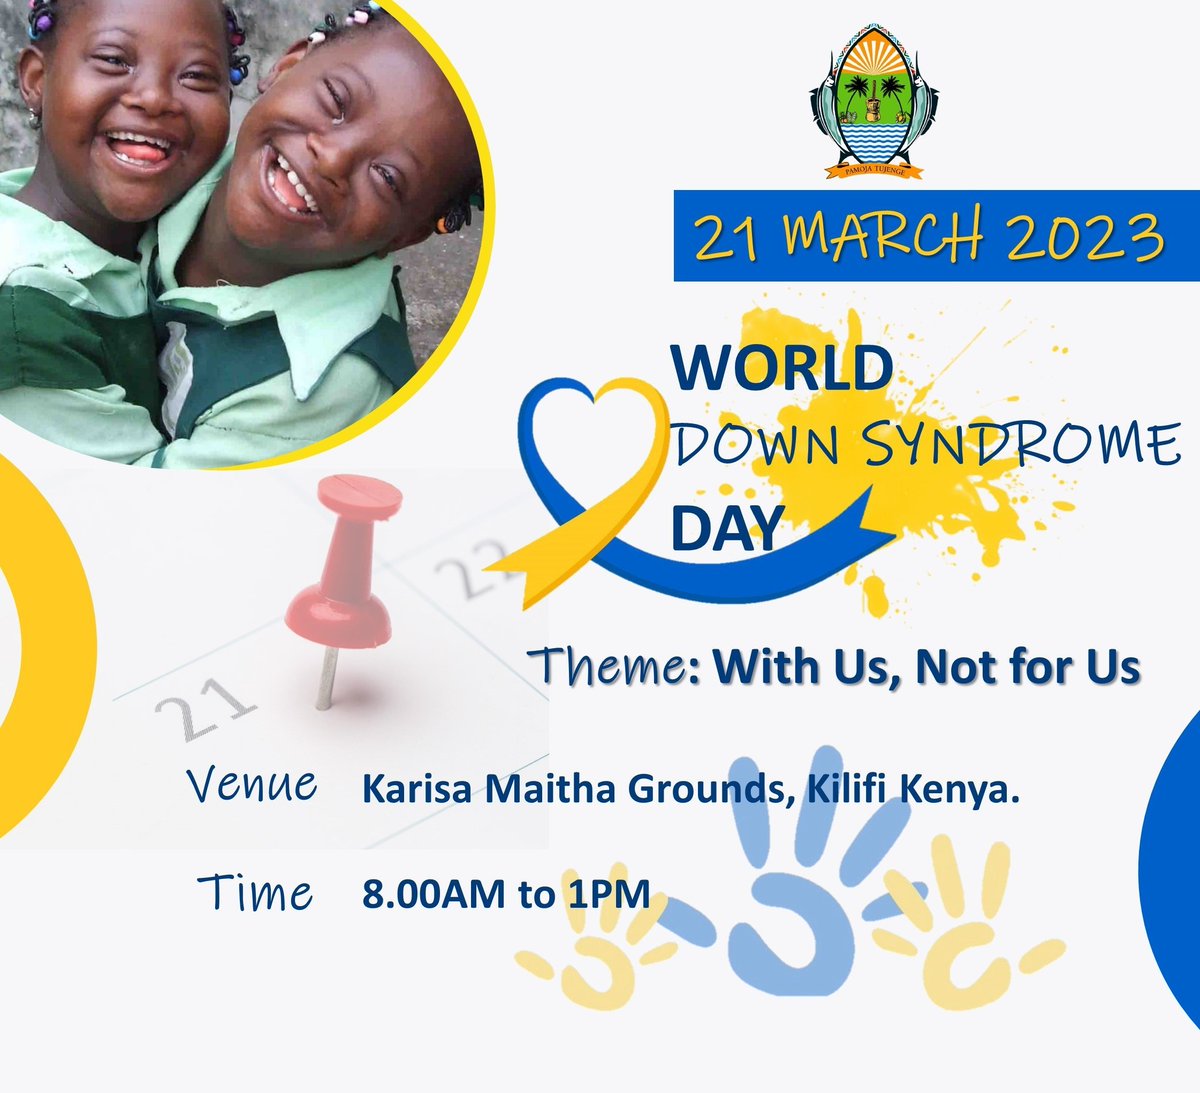 Join us today at #karisamaithaGrounds as we celebrate #worlddownsyndromeday2023 This day is to bring awareness to people with Down syndrome and their rights! Theme: With us,Not for us @Ncpwds @DOHKilifi @BasicNeeds_KE @Difu_Simo @Afya_360 #WDSD2023